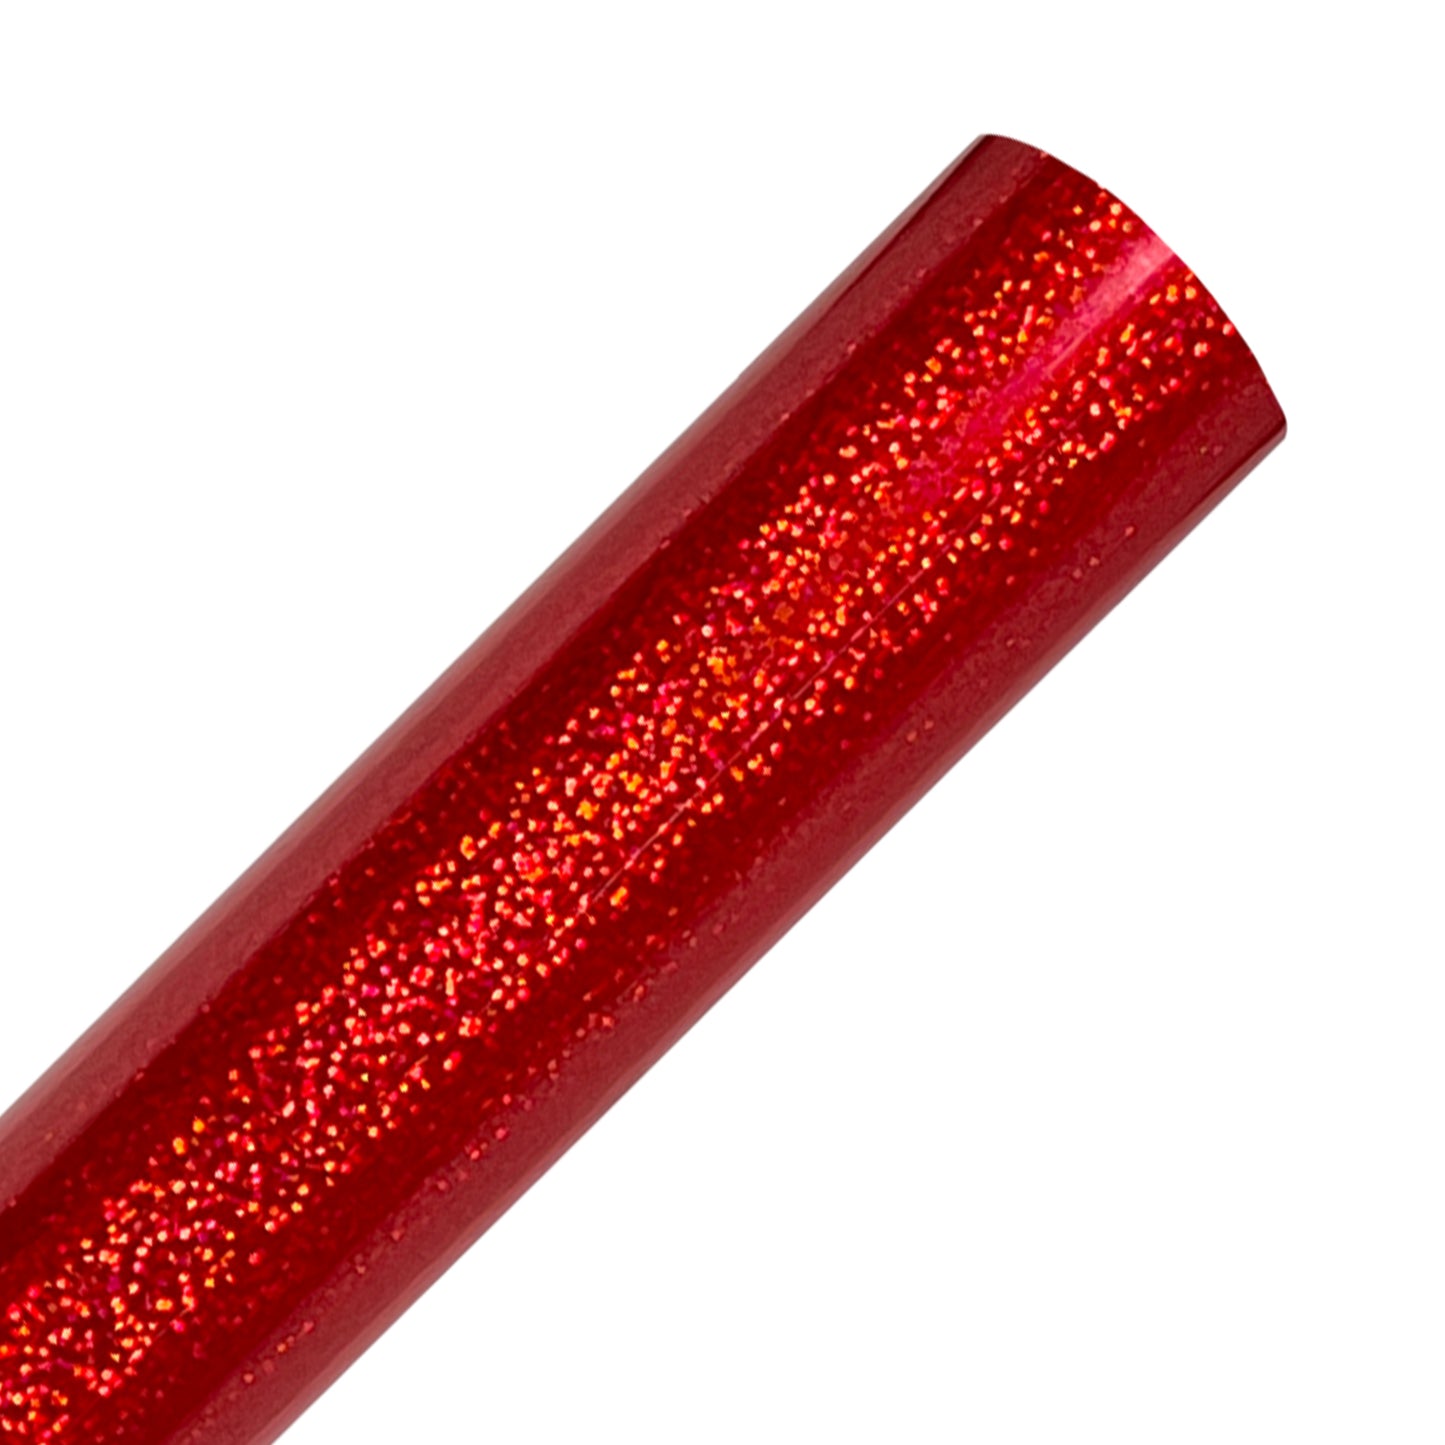 Red Metallic Adhesive Vinyl Rolls for Cricut, Silhouette | 6 Feet |  Permanent Vinyl By Craftables